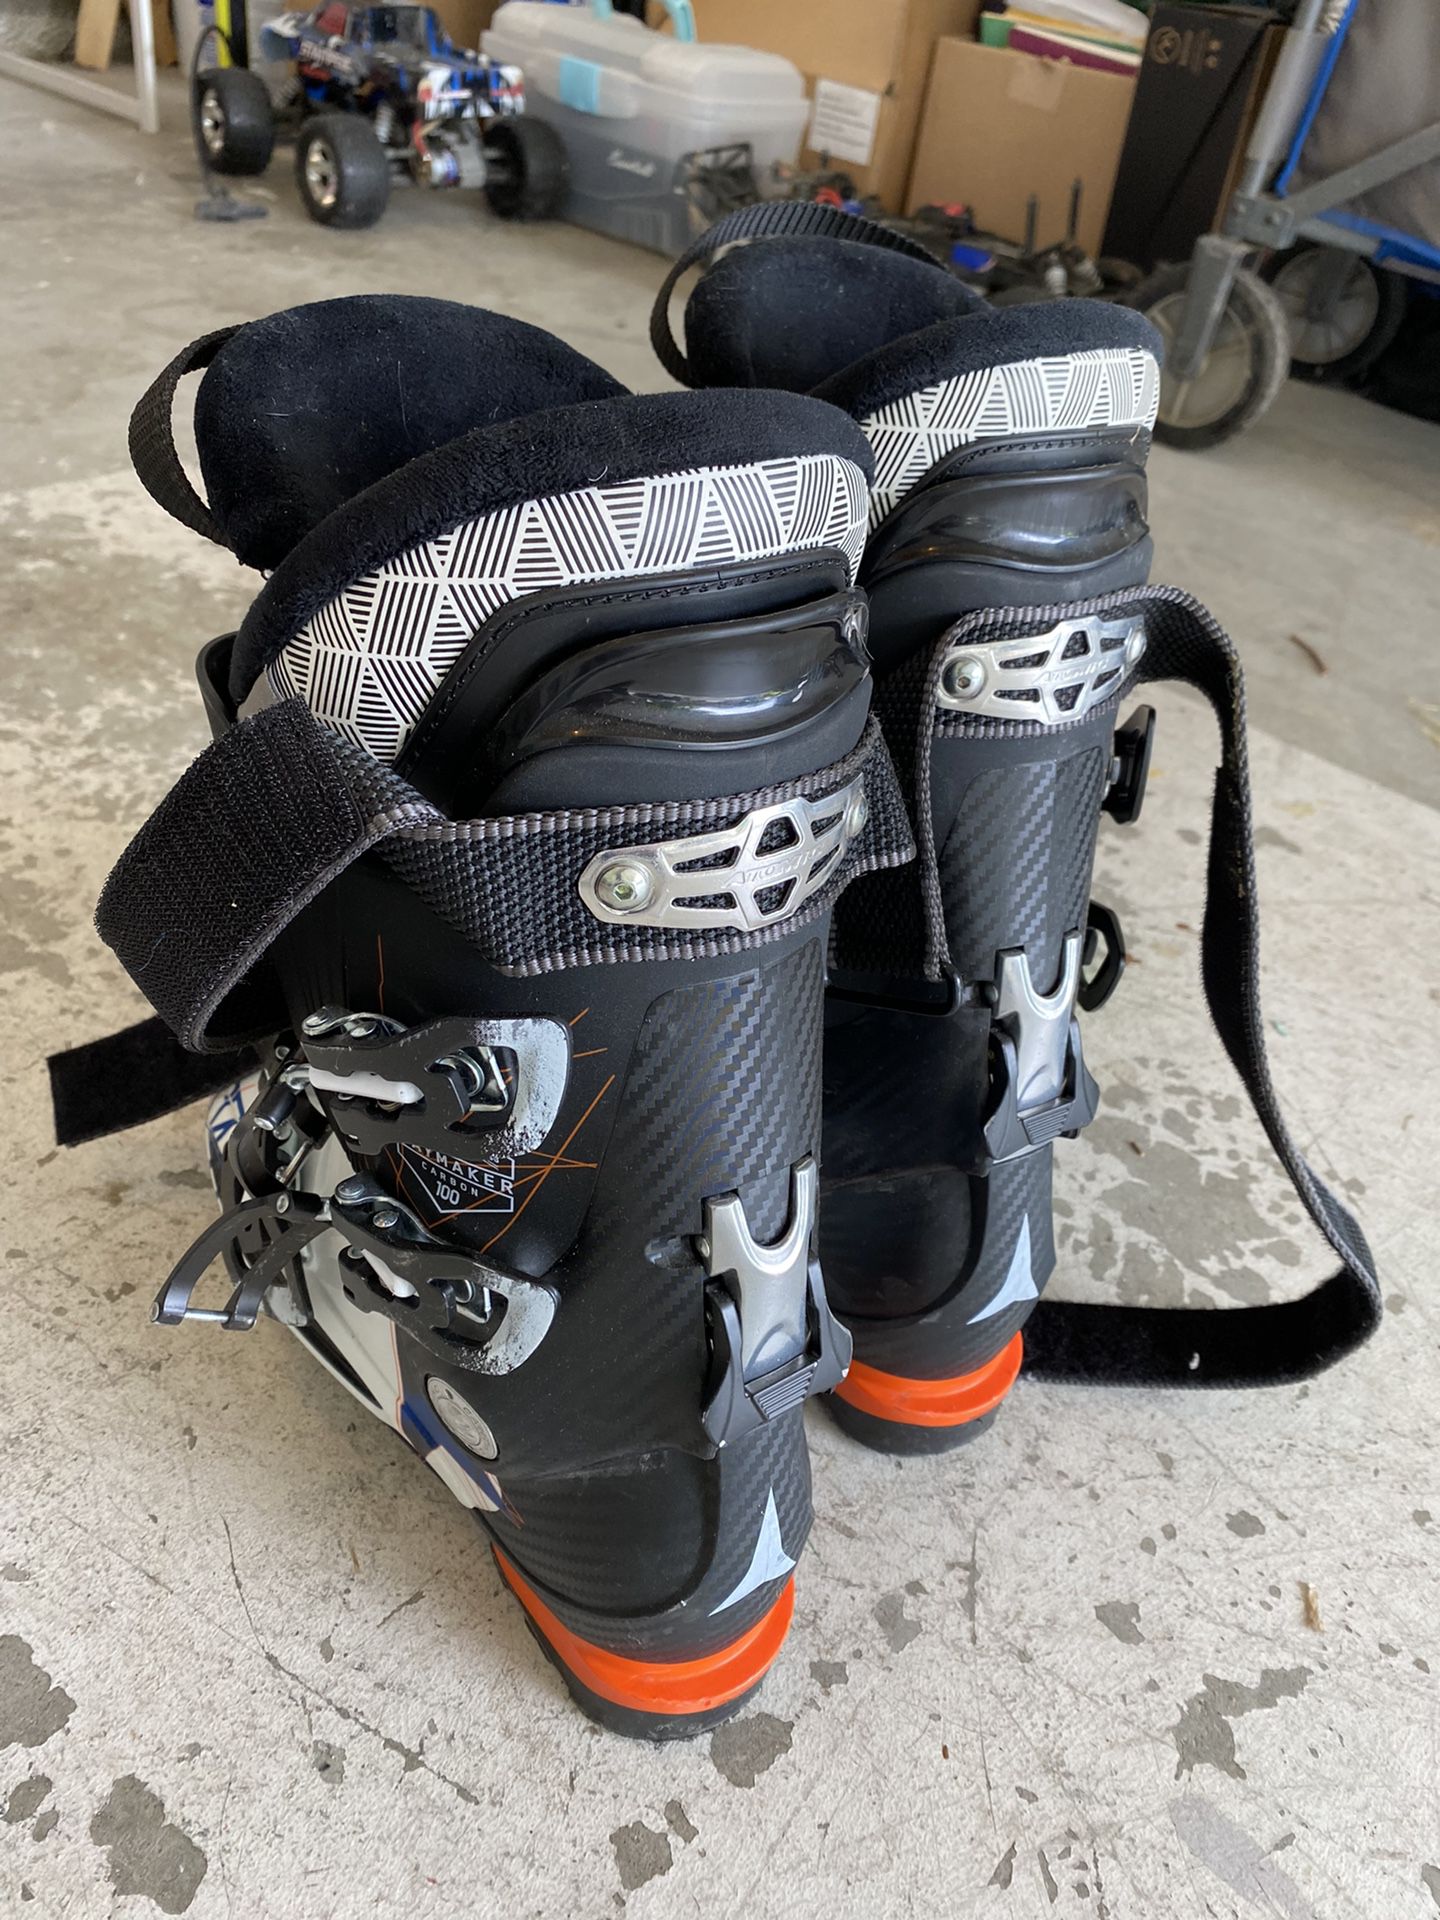 Skis Boots Poles